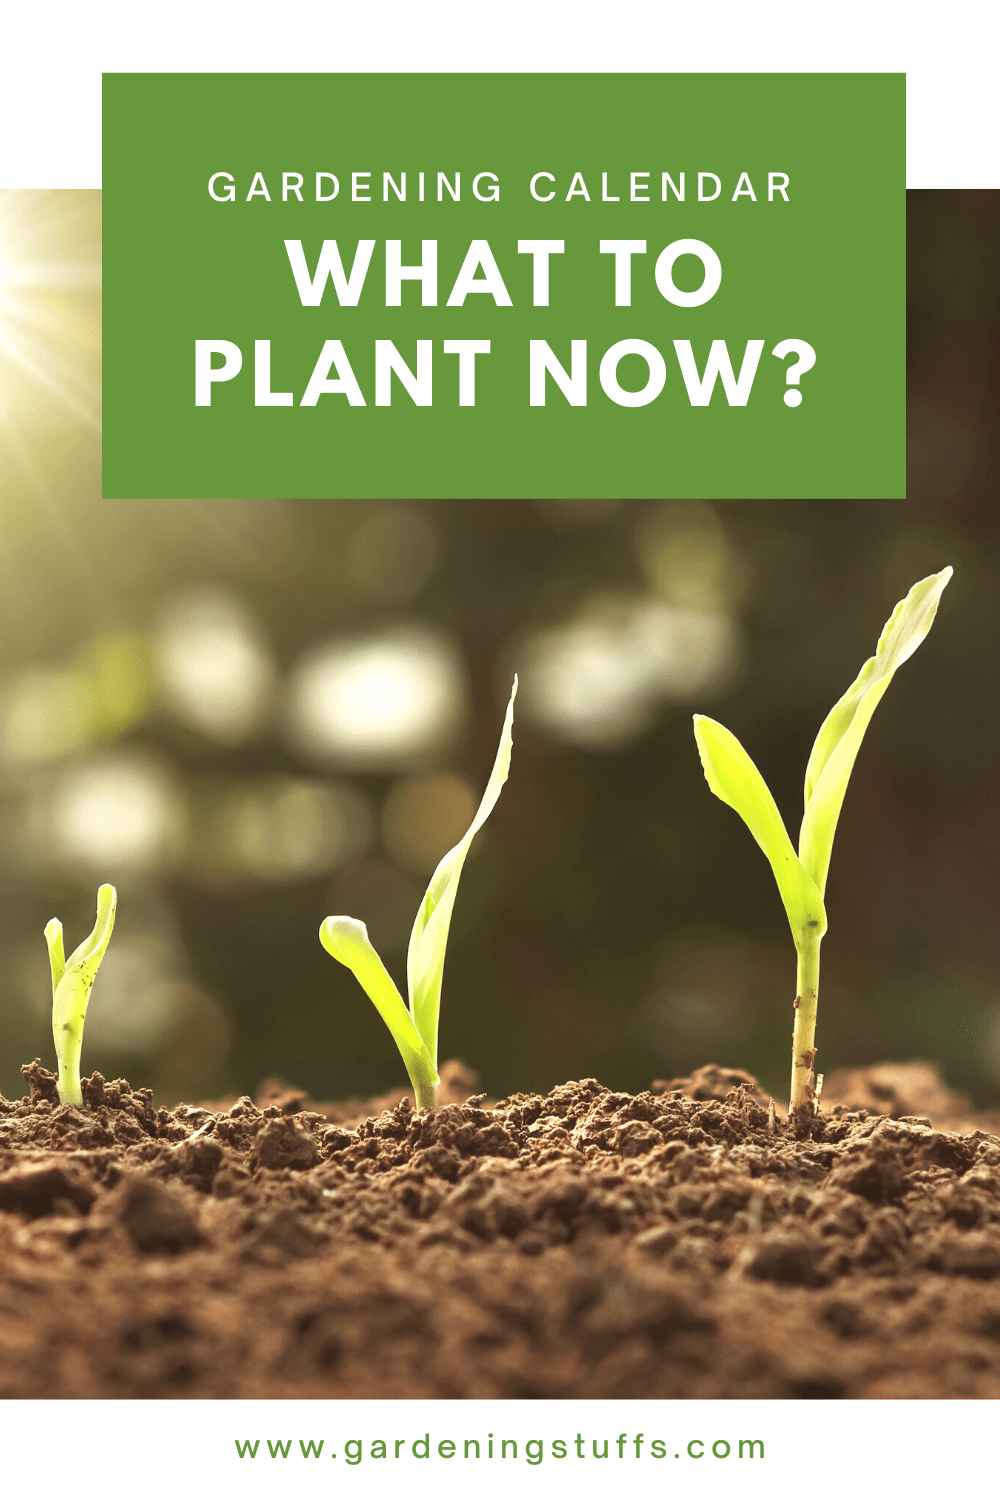 Did you know that plants flourish best if planted according to their growing season? If you’re quite unsure about the kinds of plants you want to thrive in your garden, the following guide can help. This guide will tell which what you can plant during every month of the year.